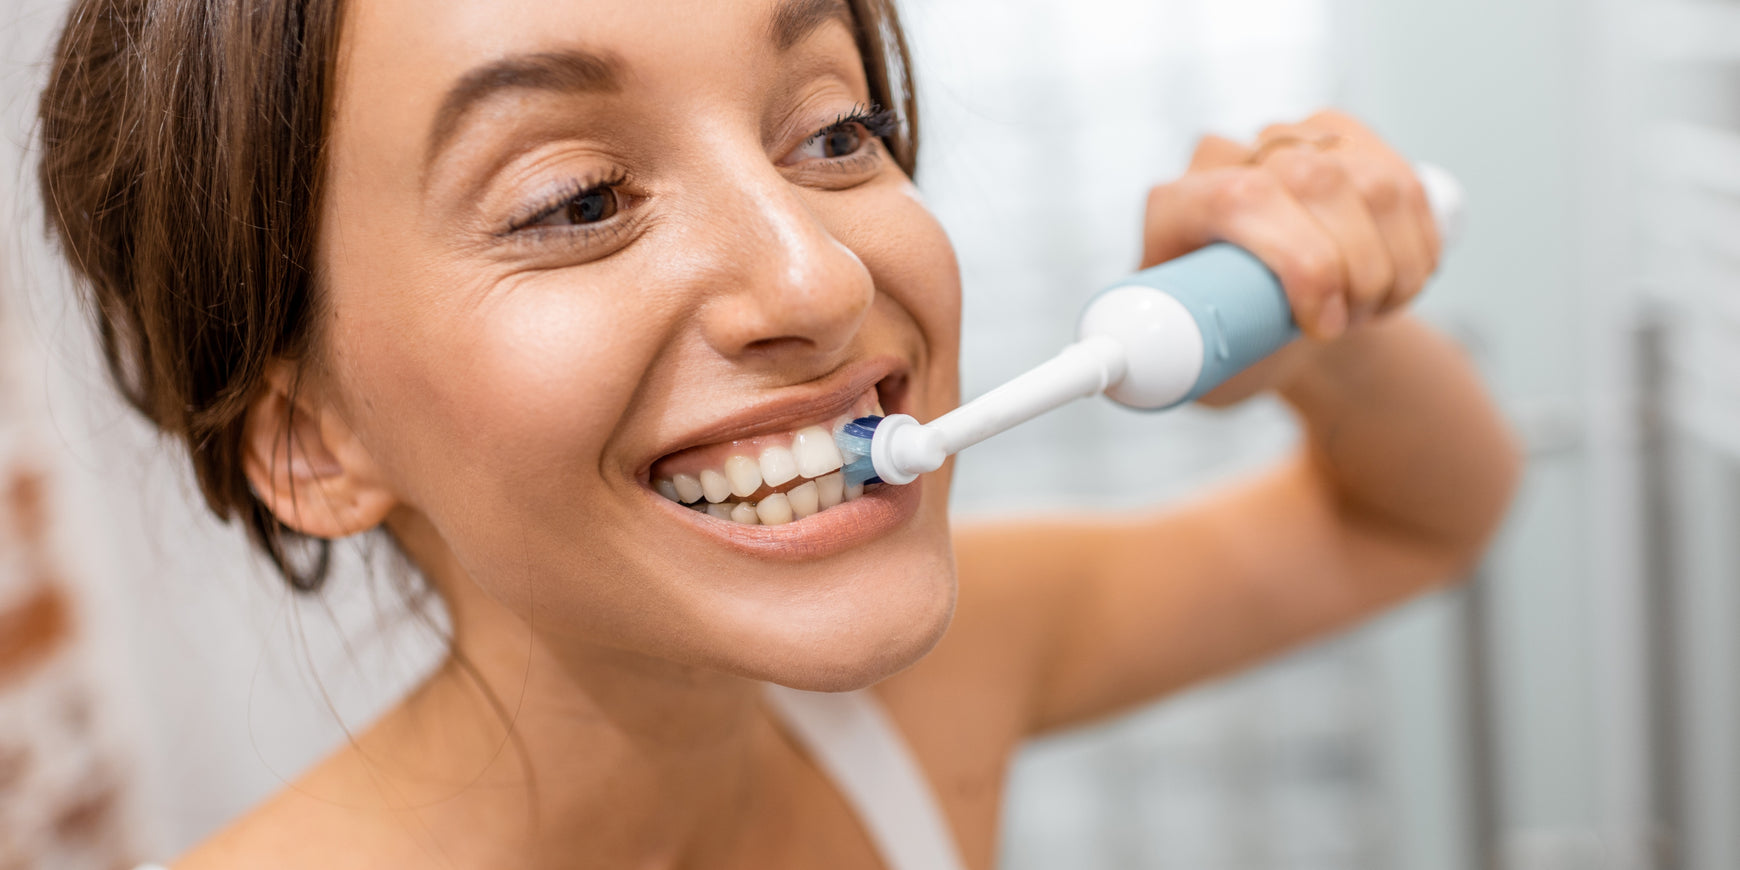 Why Choose a Sonic Electric Toothbrush?